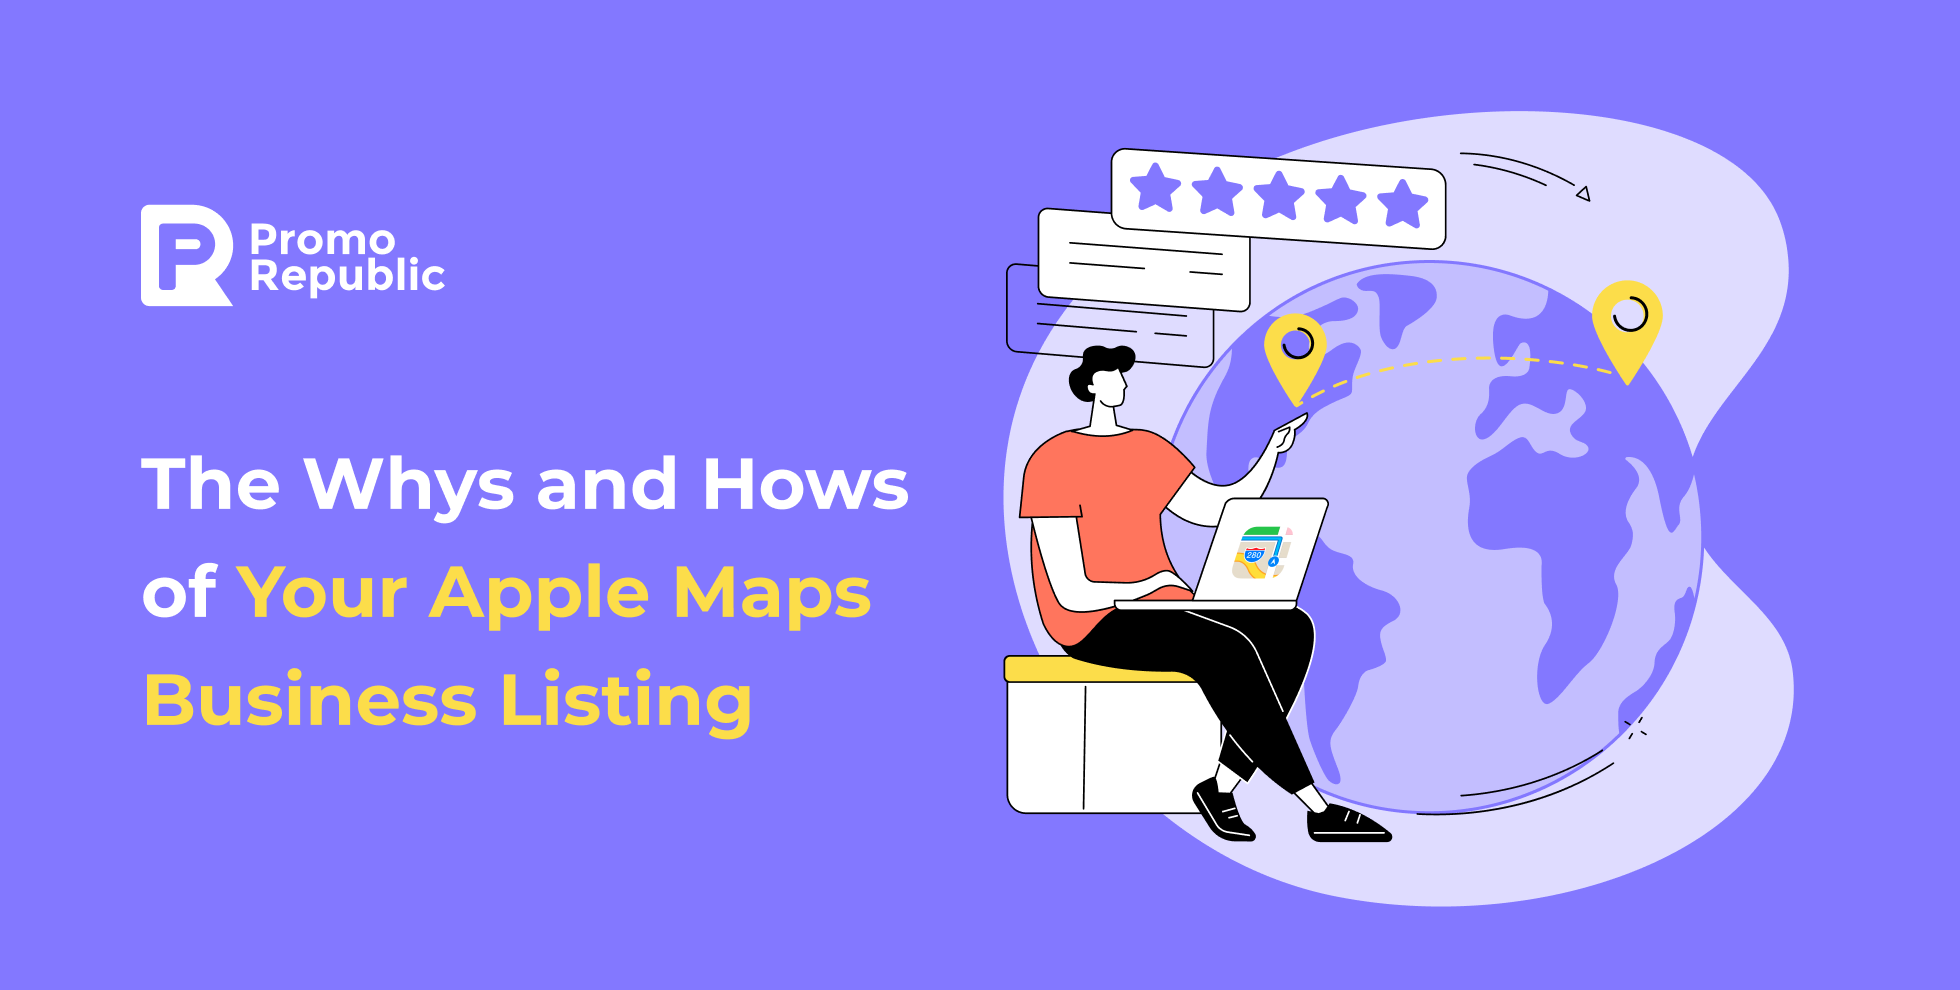 Apple Maps Business Listing Guide